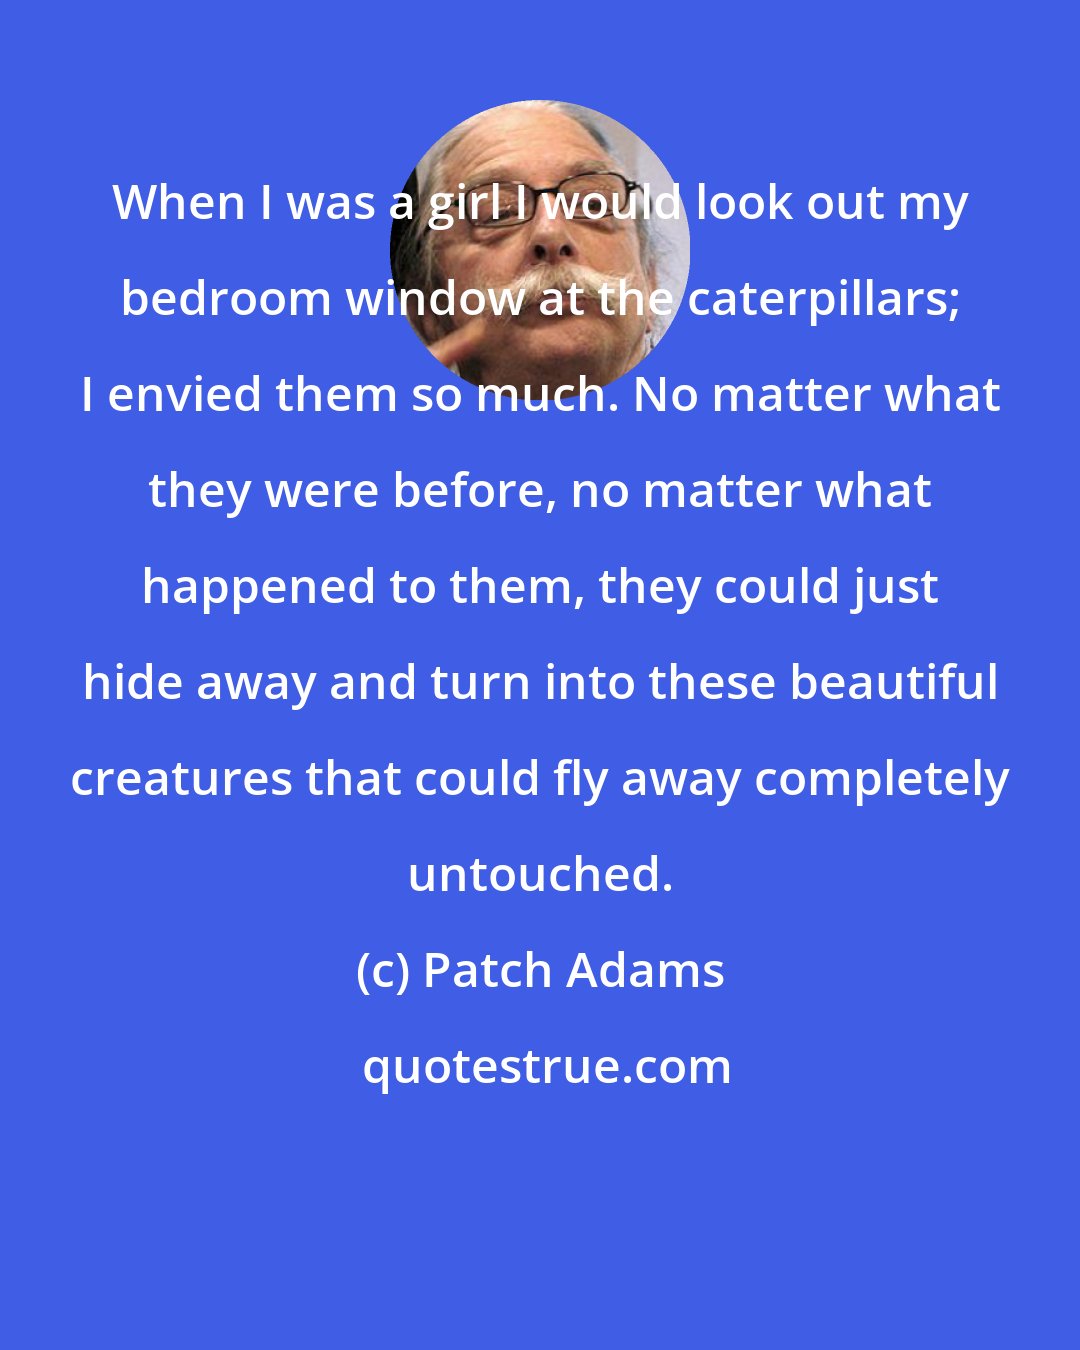 Patch Adams: When I was a girl I would look out my bedroom window at the caterpillars; I envied them so much. No matter what they were before, no matter what happened to them, they could just hide away and turn into these beautiful creatures that could fly away completely untouched.